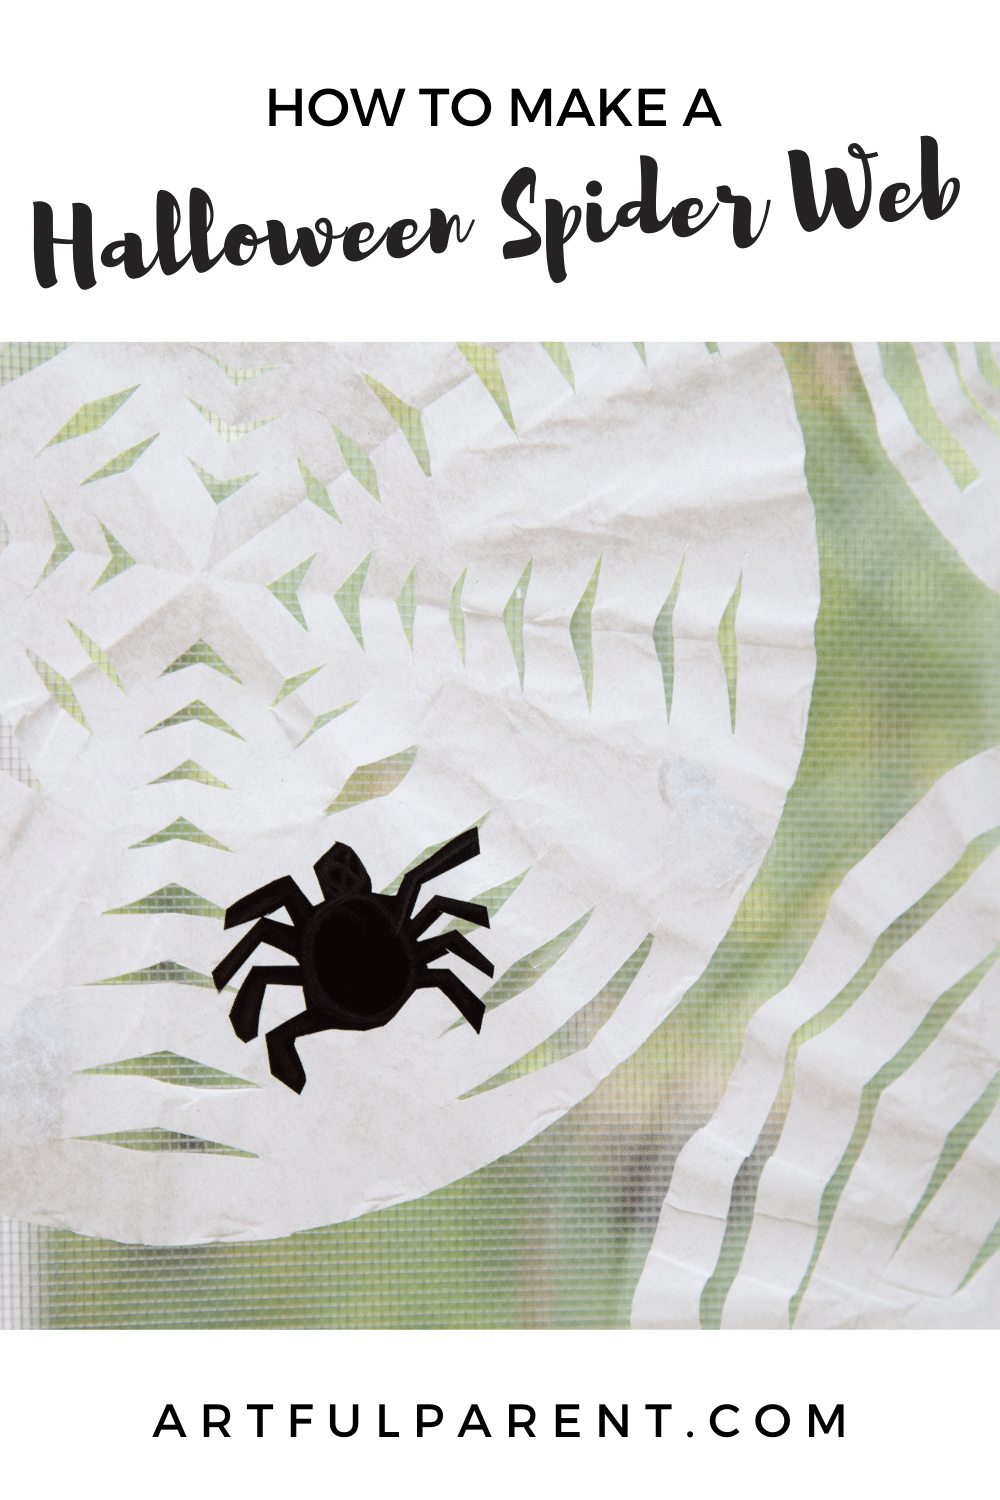 How to Make A Halloween Spider Web